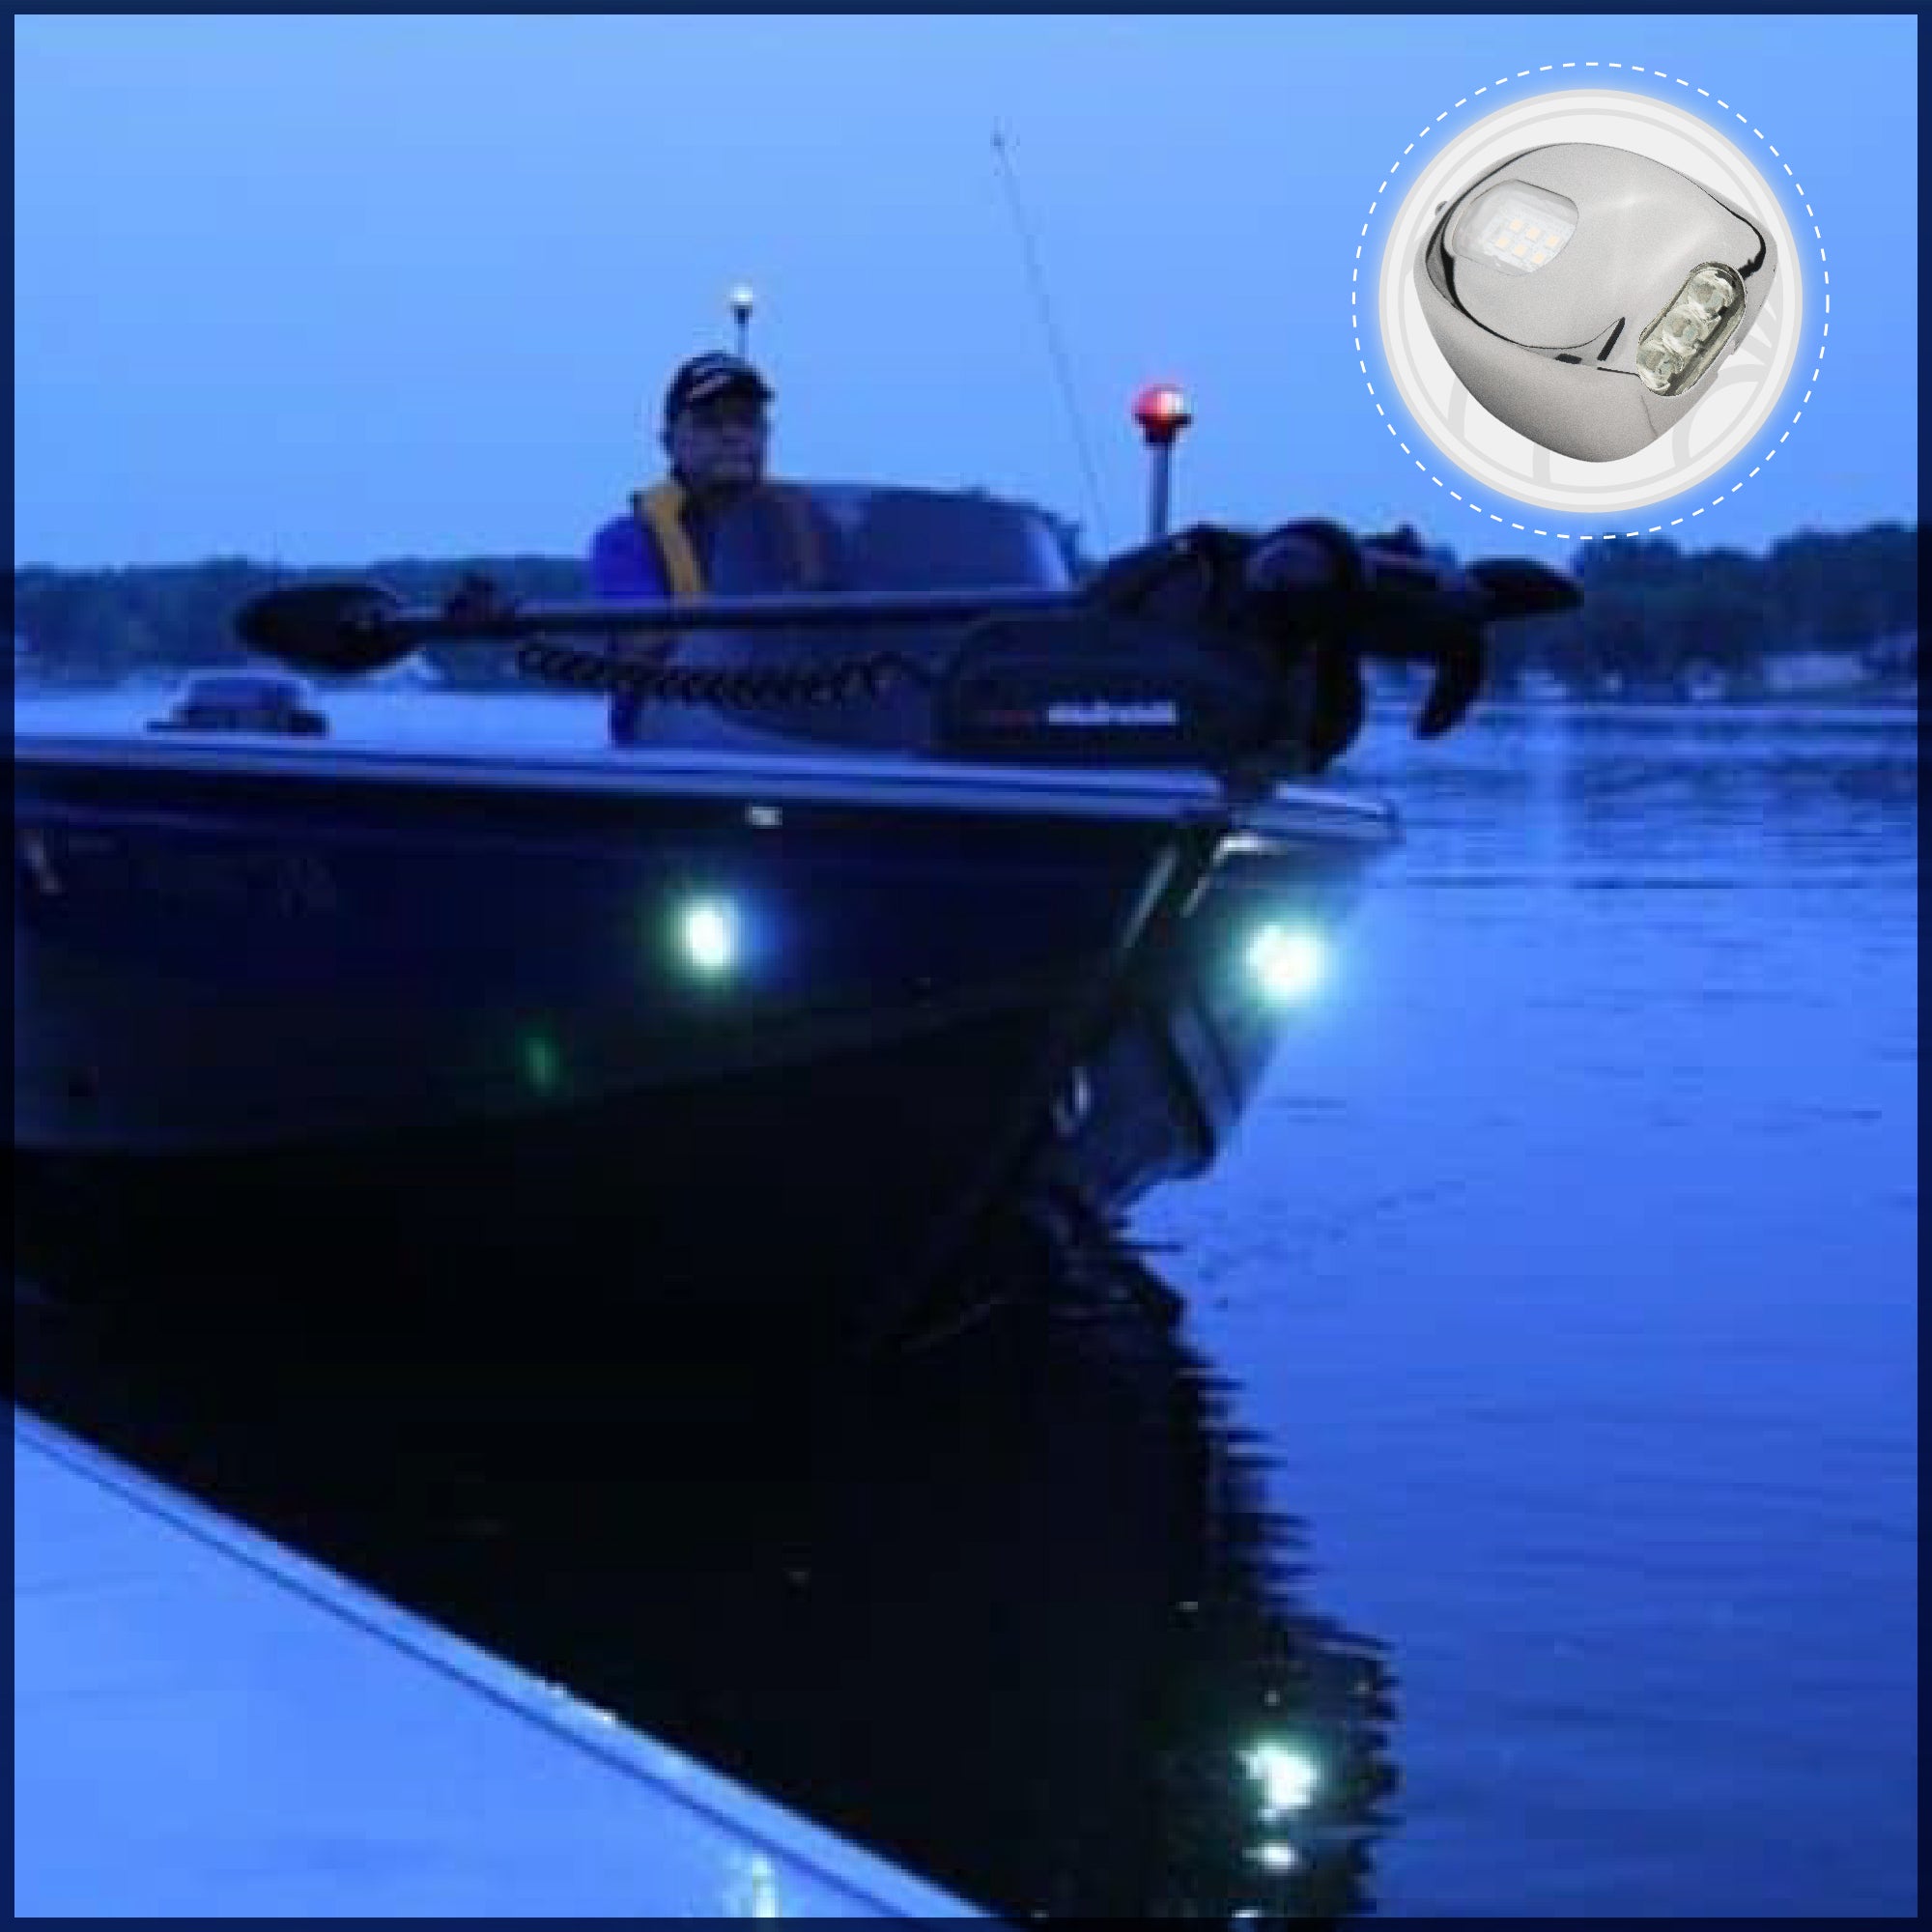 LED Front and Side Light for Docking, 2-Pack - FO4600-M2